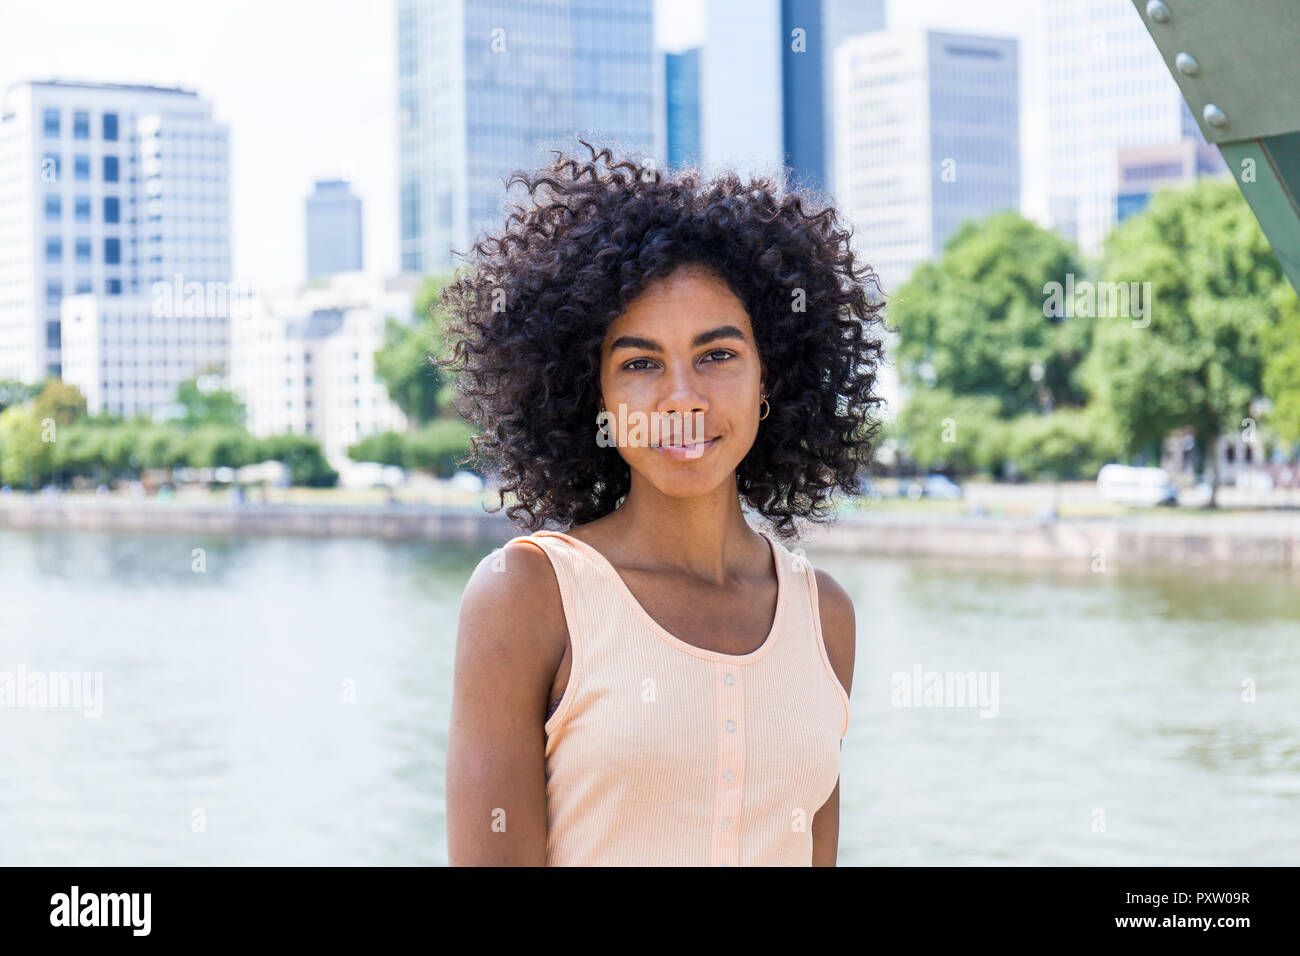 Germany, Frankfurt, portrait of relaxed young woman with curly hair in front of Main River Stock Photo